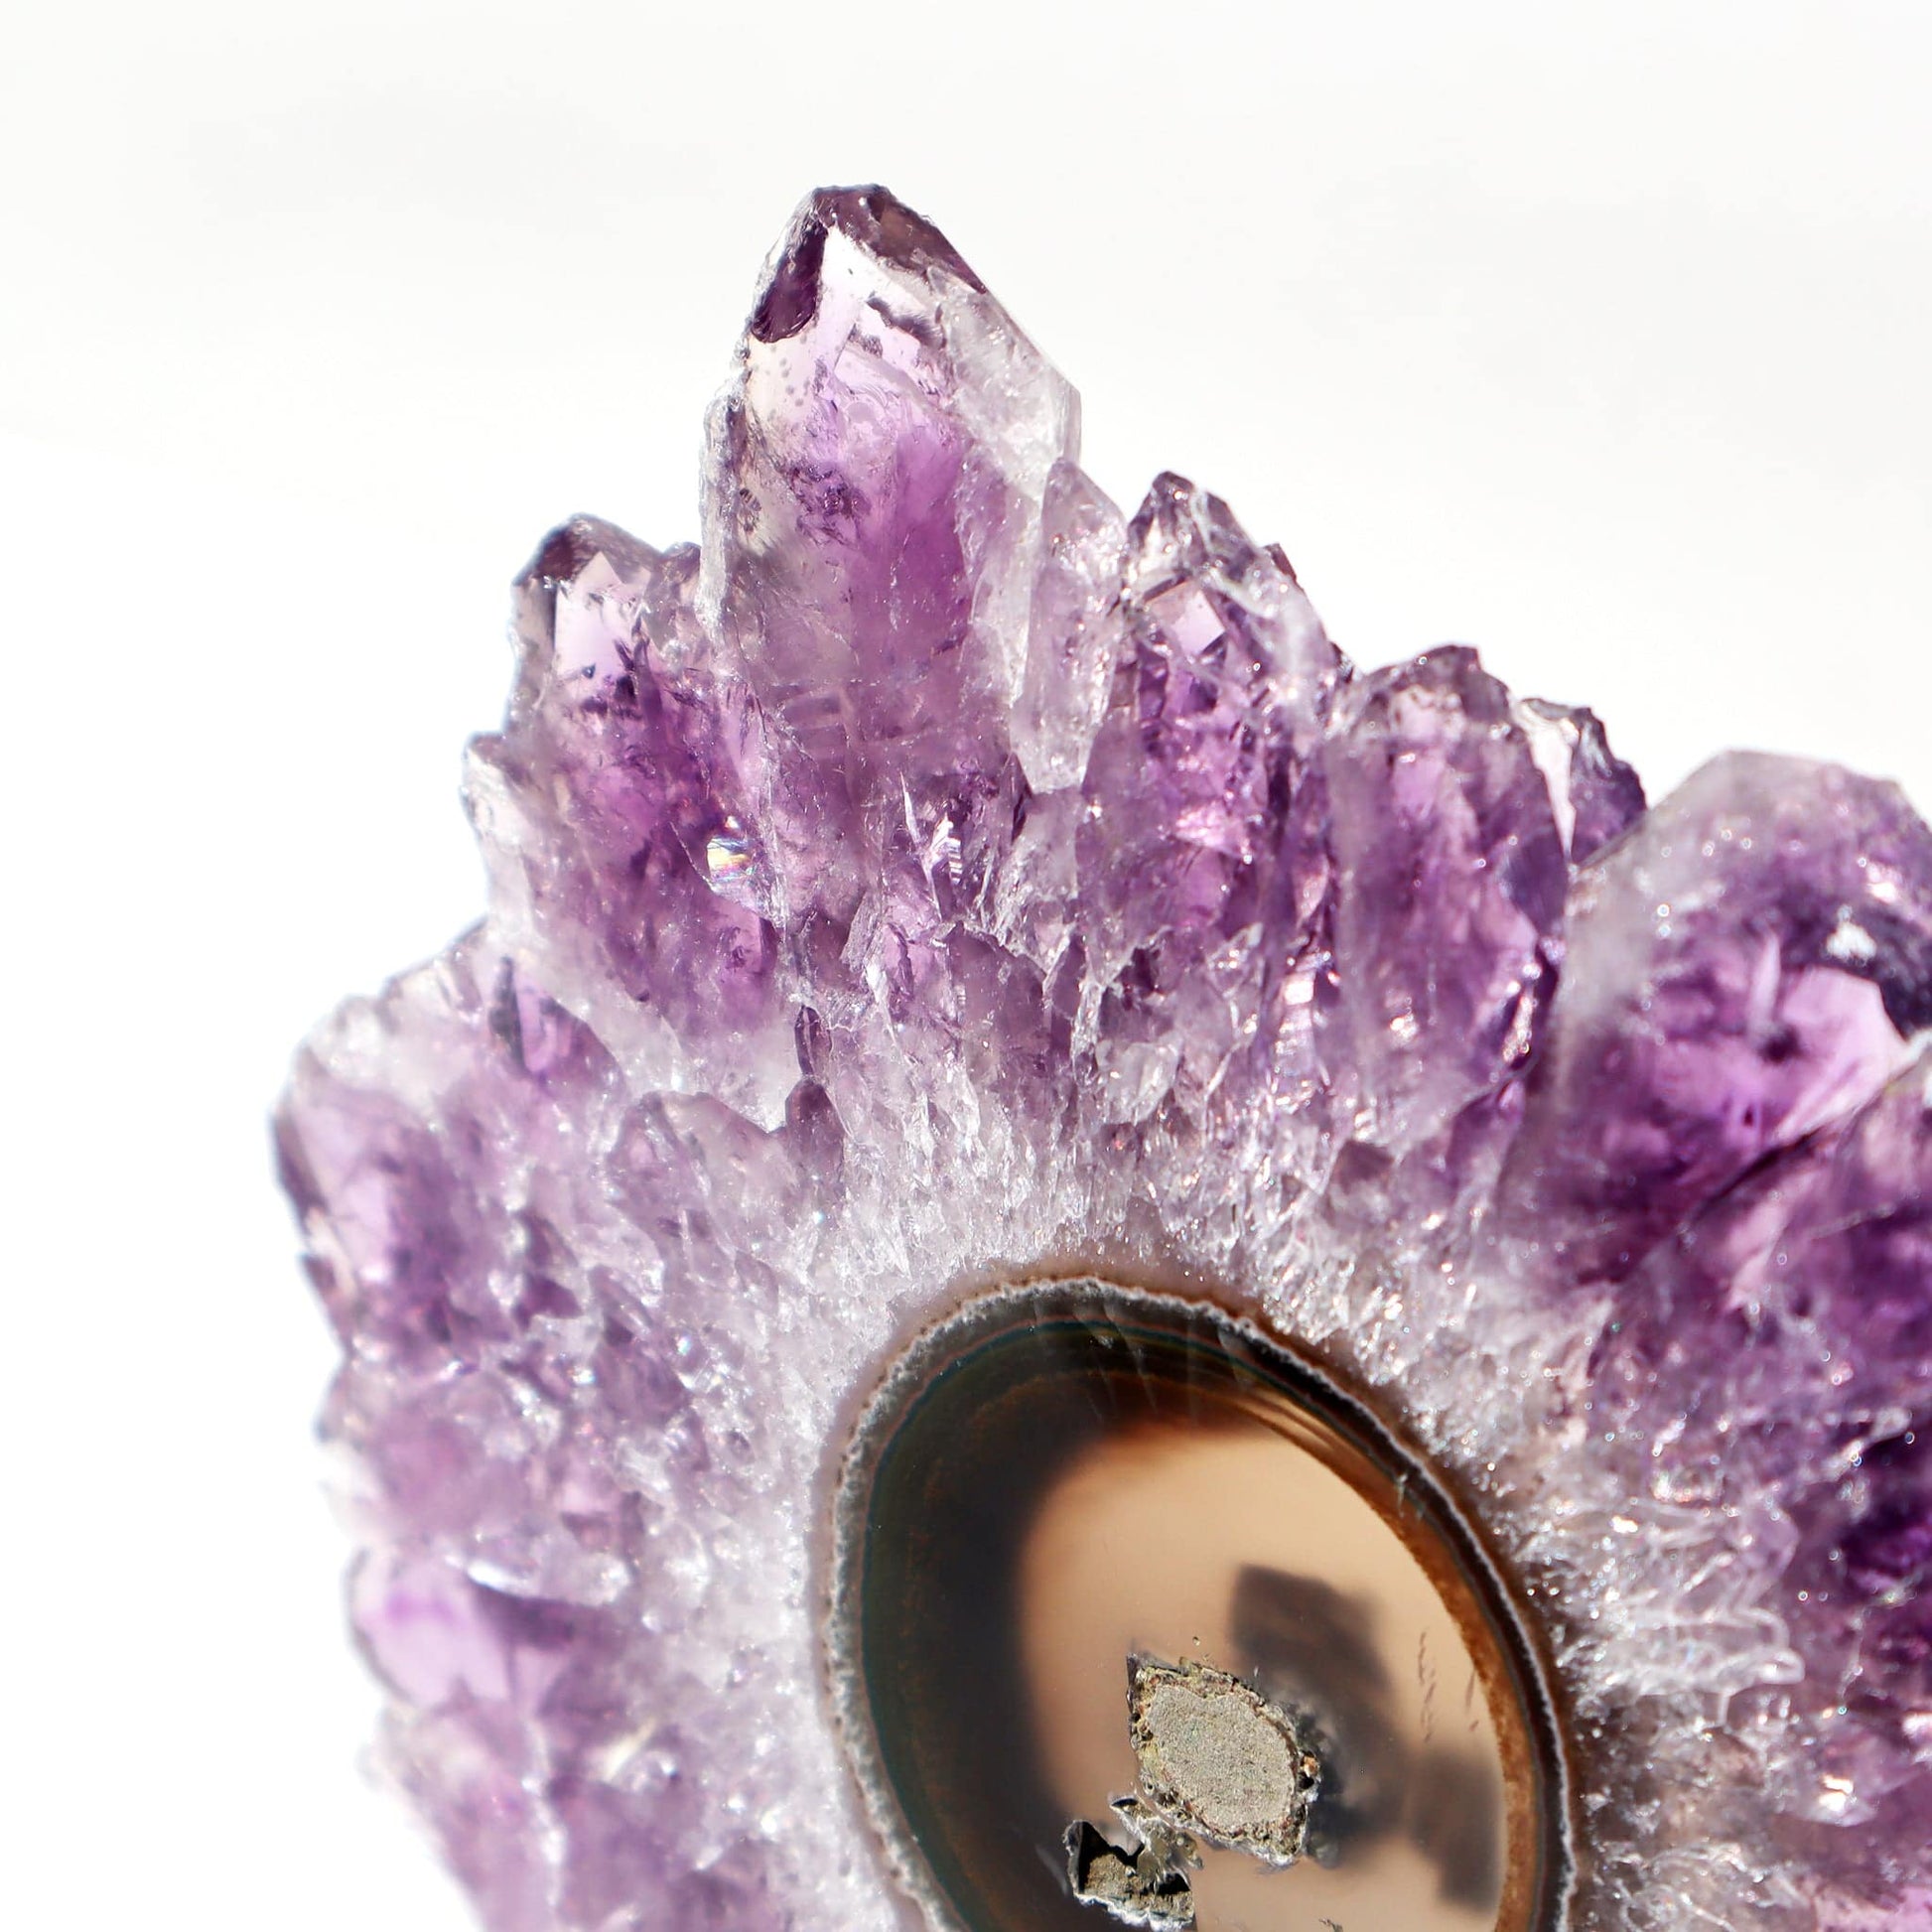 Crystal Mineral Flower Amethyst Stalactite - Deepest Earth